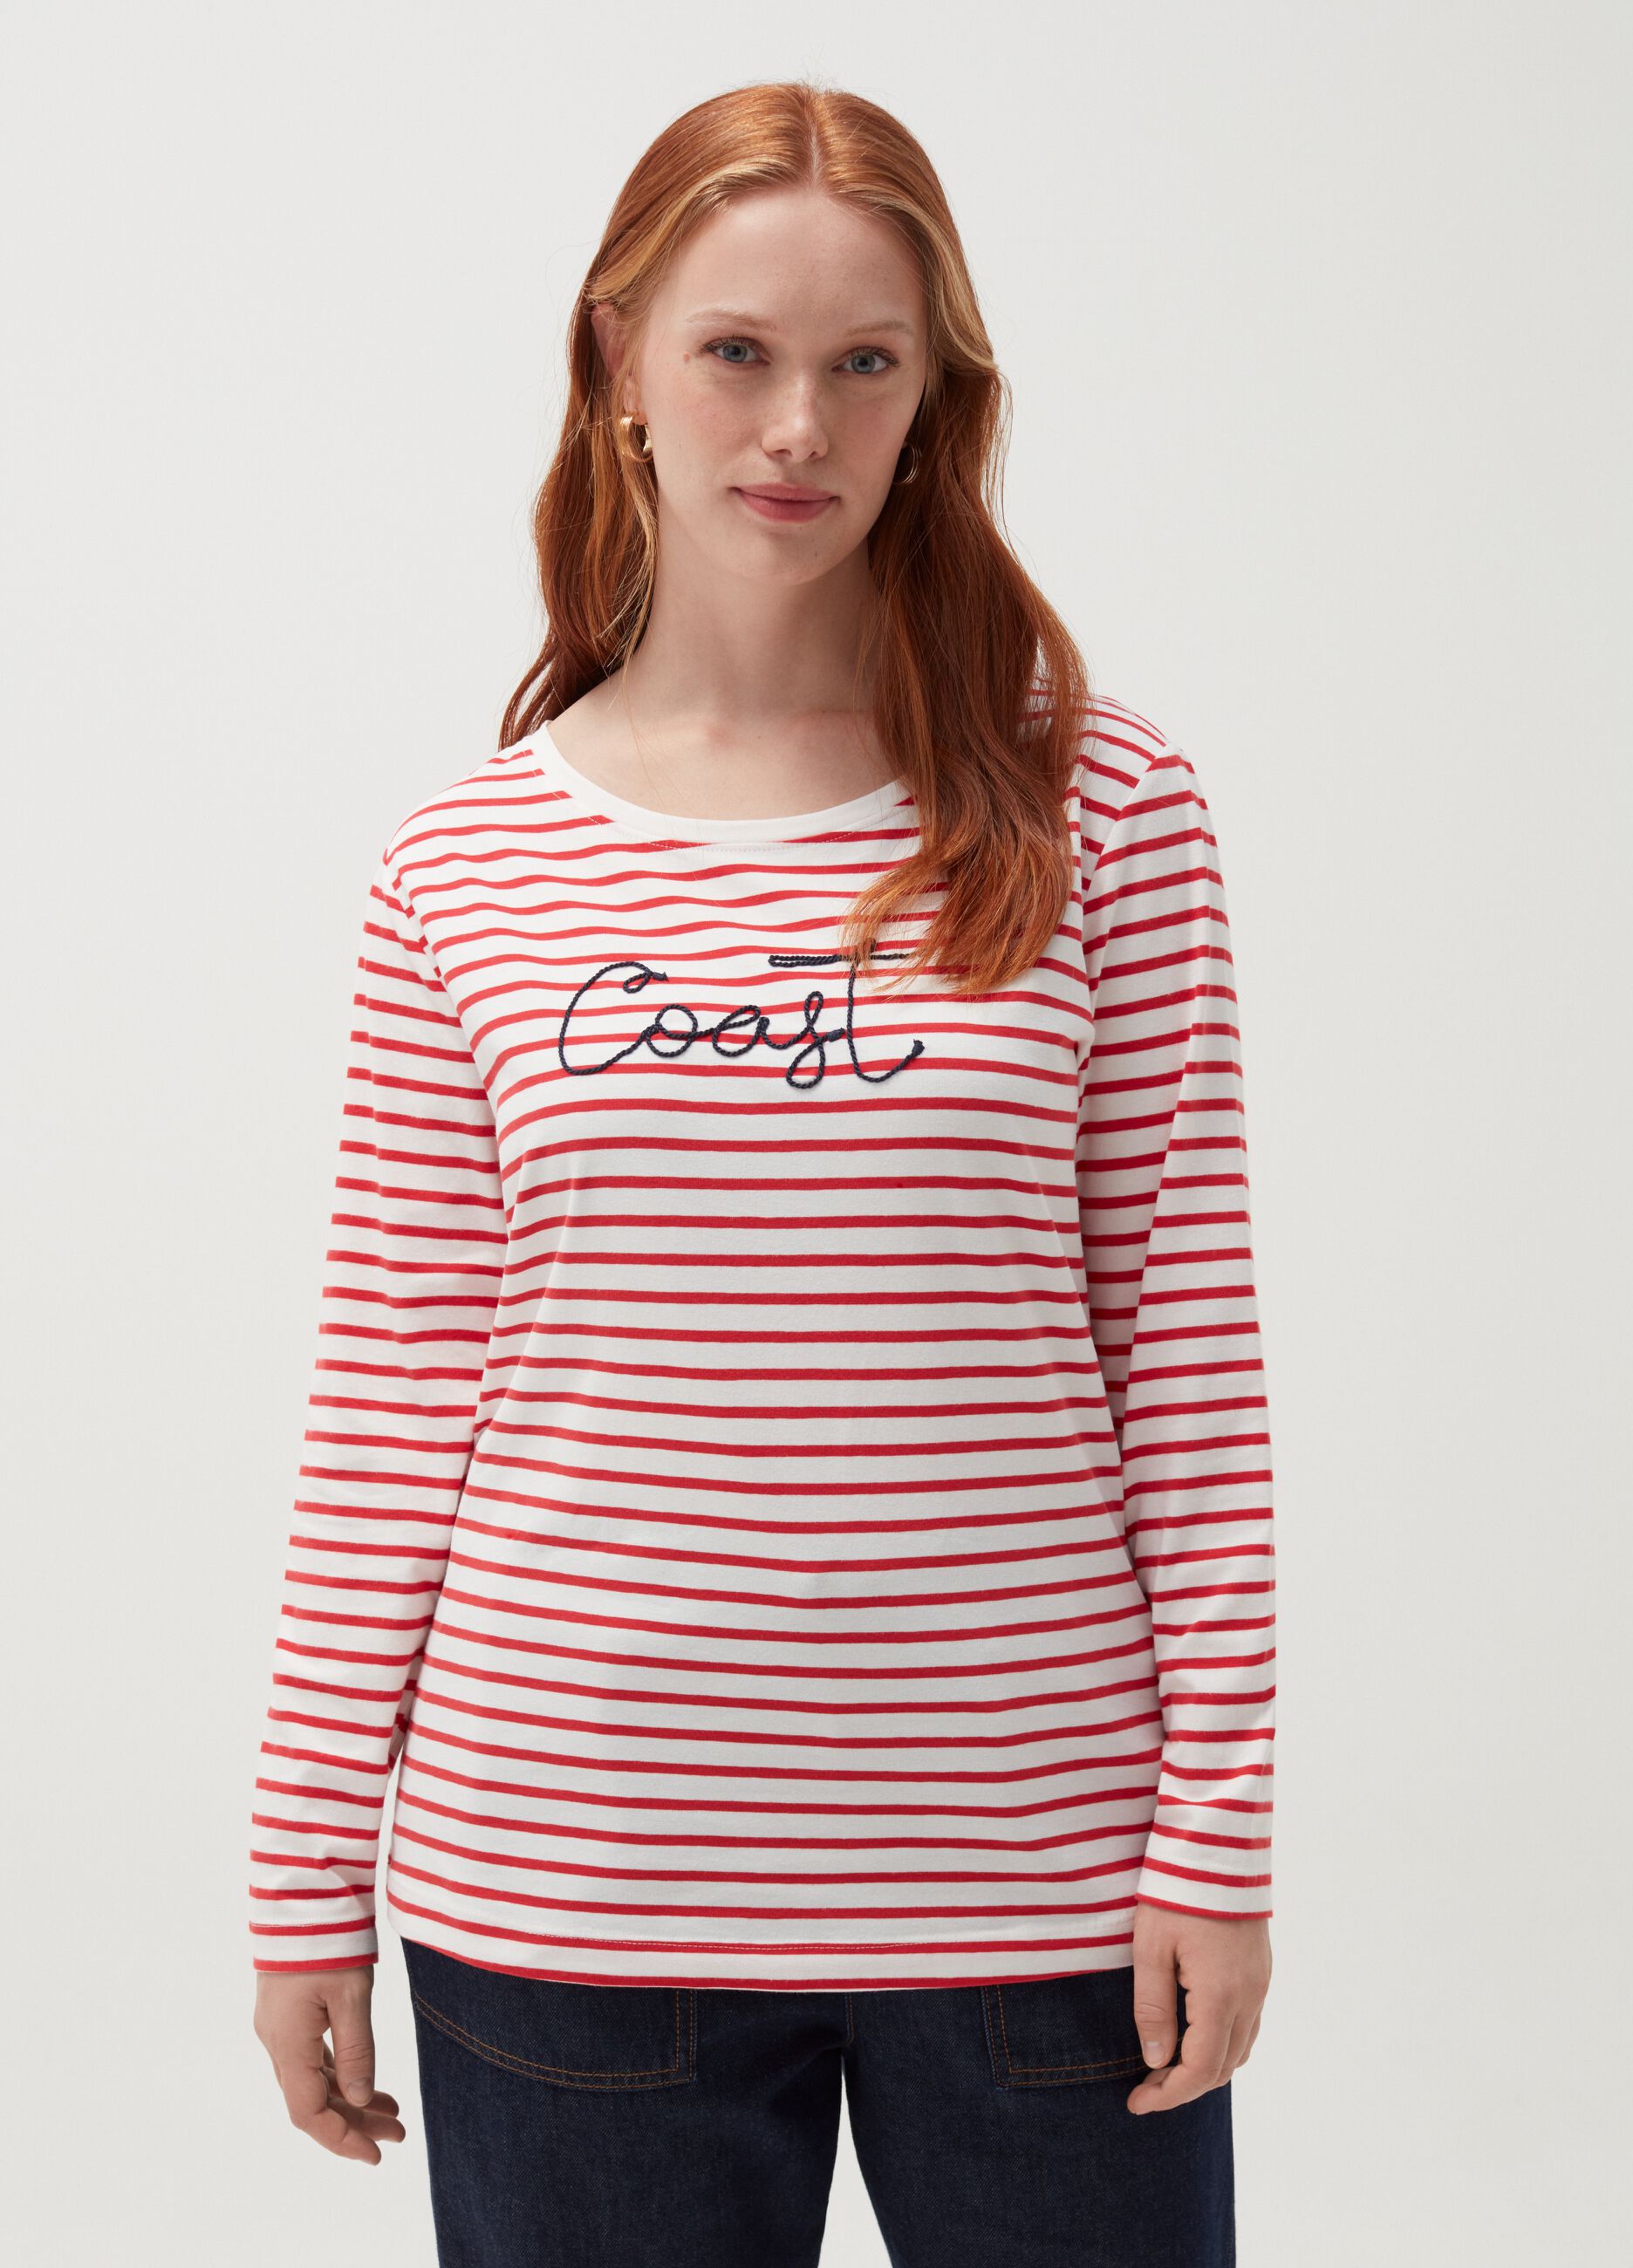 MYA Curvy T-shirt with striped pattern and embroidery